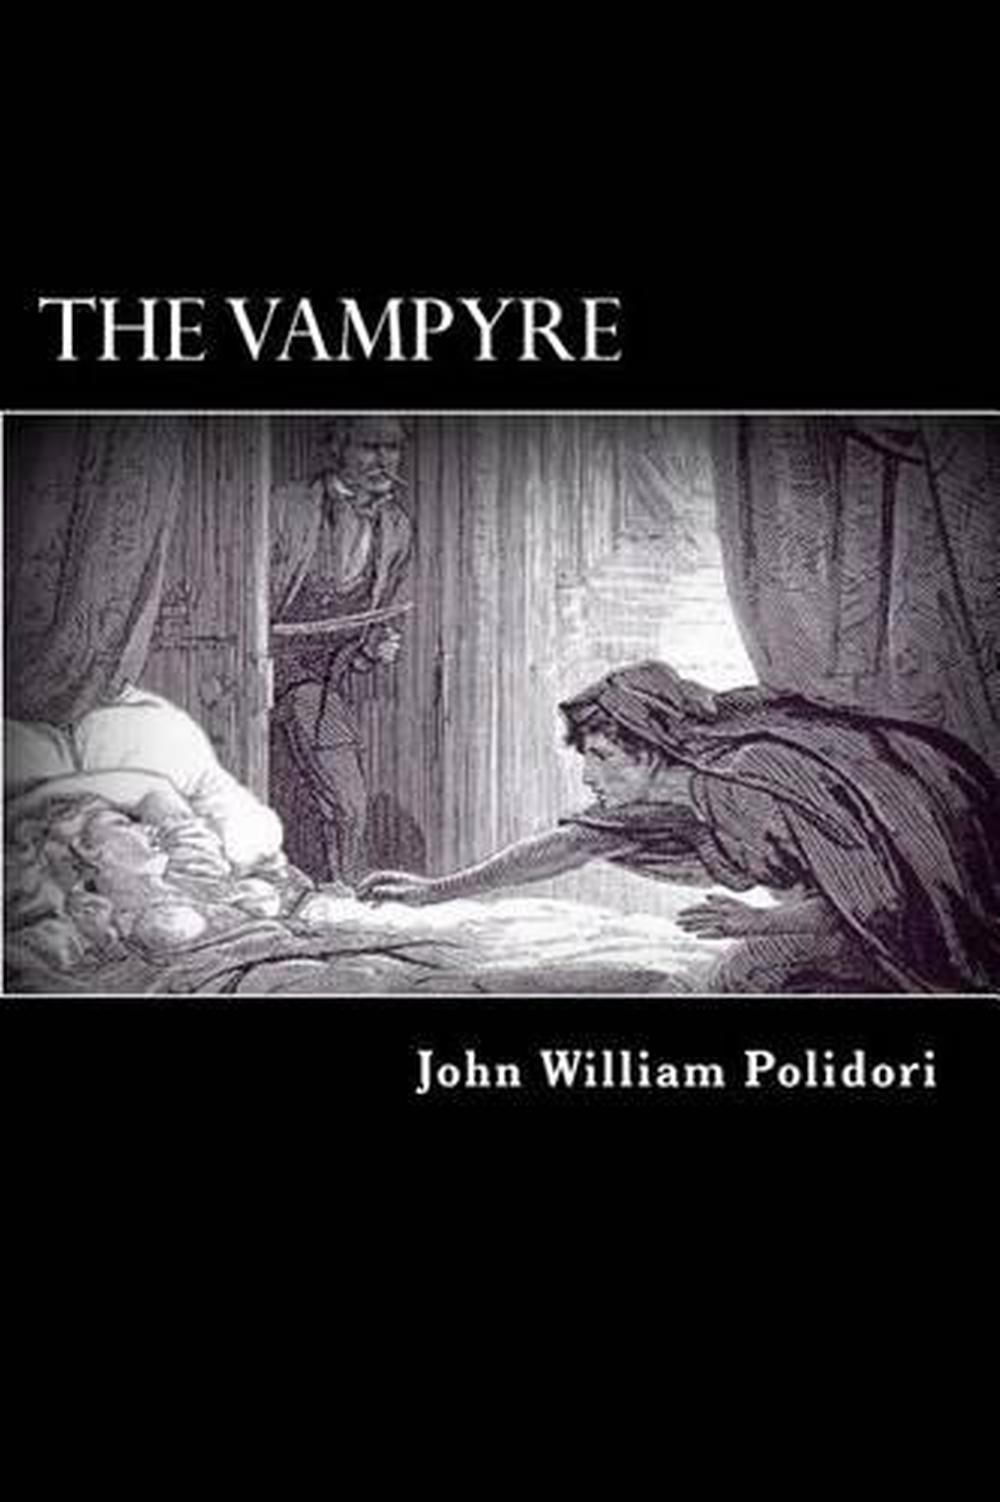 The Vampyre and Other Tales of the Macabre by Chris Baldick